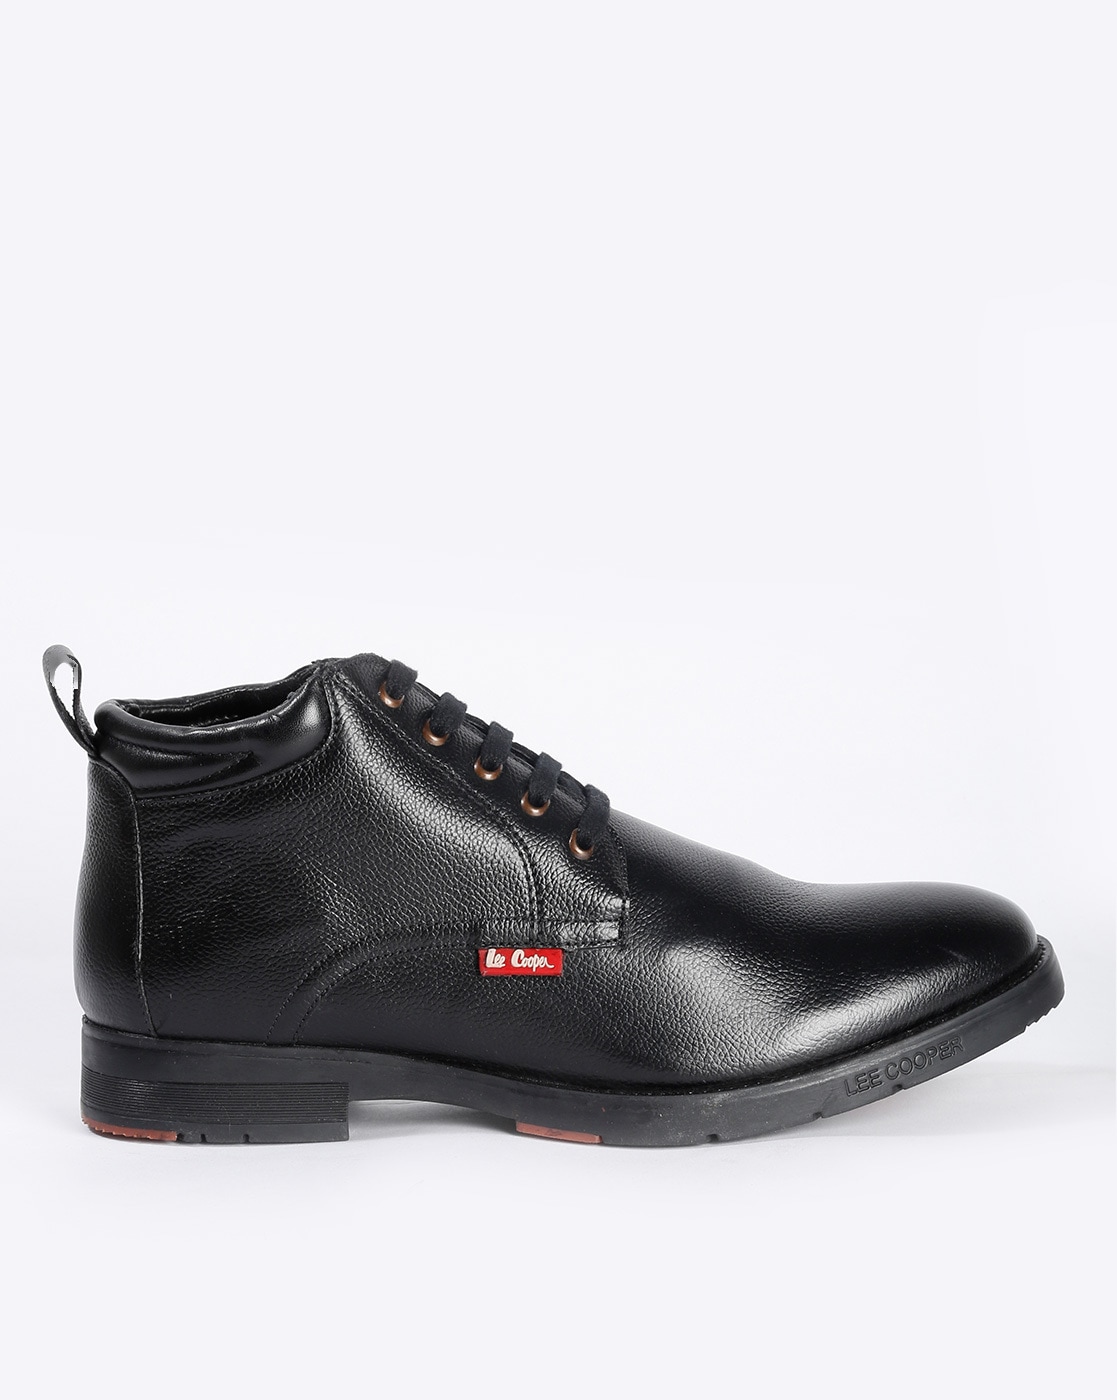 lee cooper high ankle leather shoes